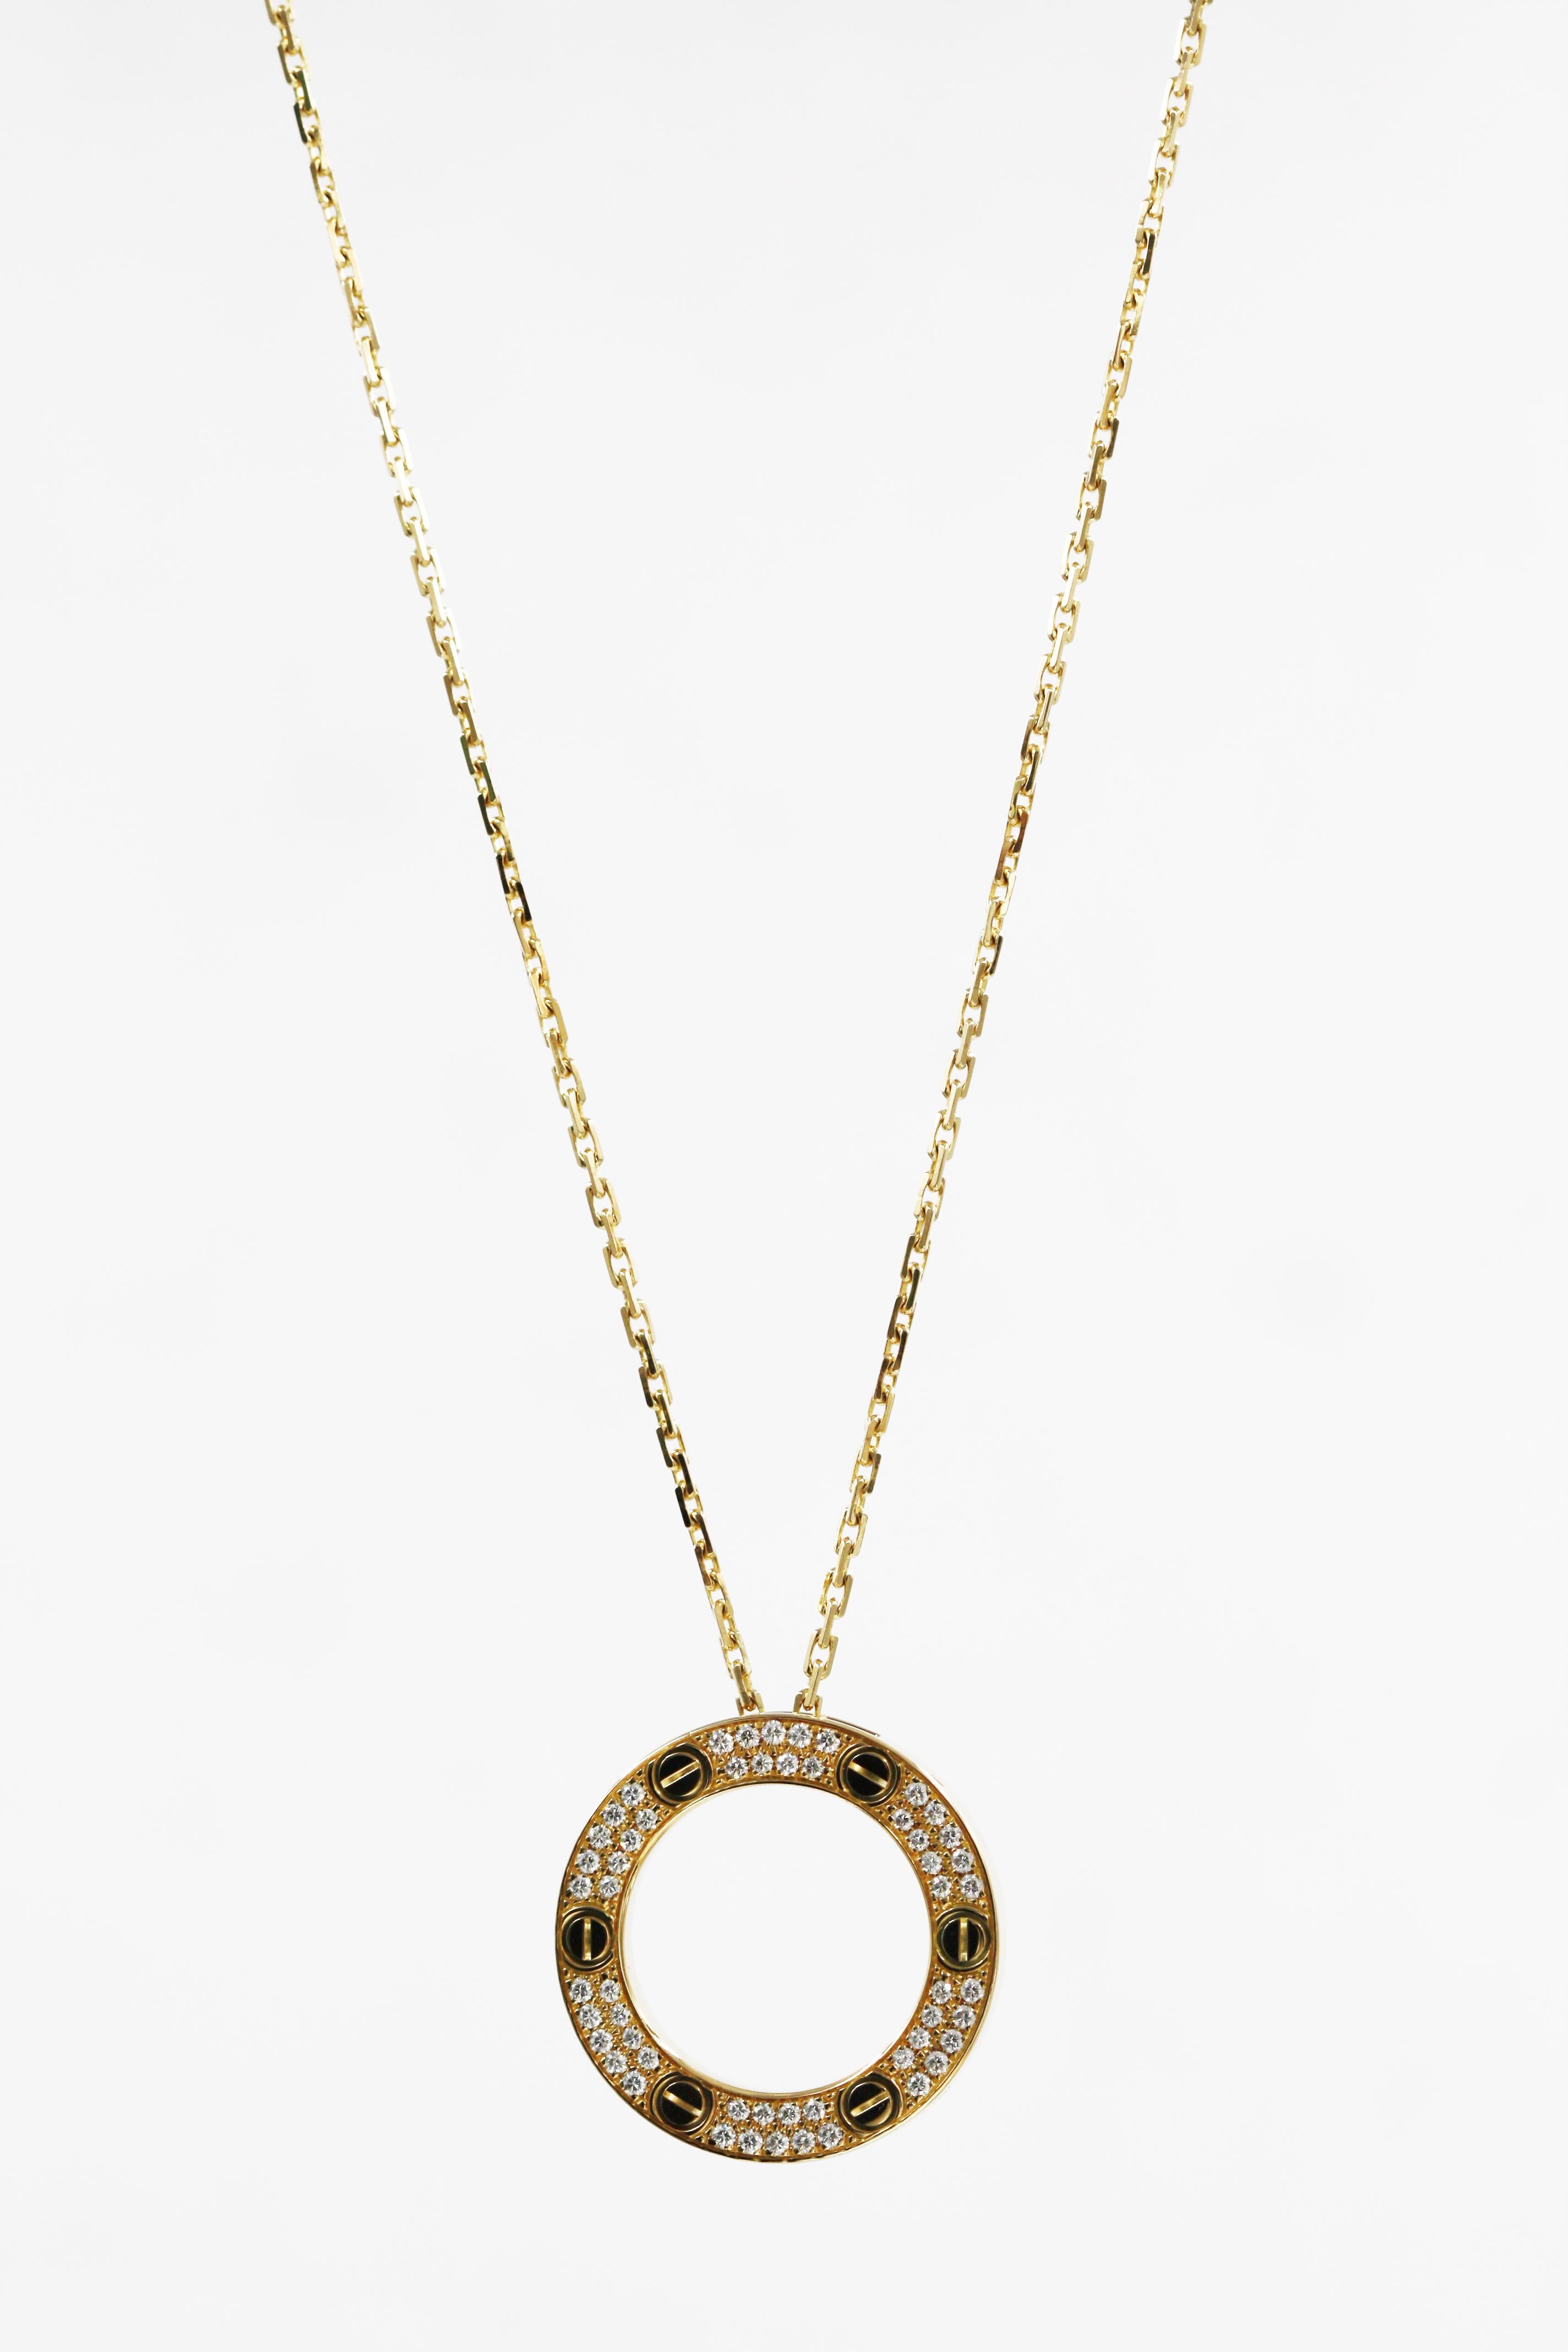 A beautiful love necklace from Cartier, made in 18K yellow gold, set with 54 brilliant-cut diamonds, total weight 0.34 carat. REF: B7058400

Length: approximately 41cm
Item will come with an original box and paper
Stock#: CTR483